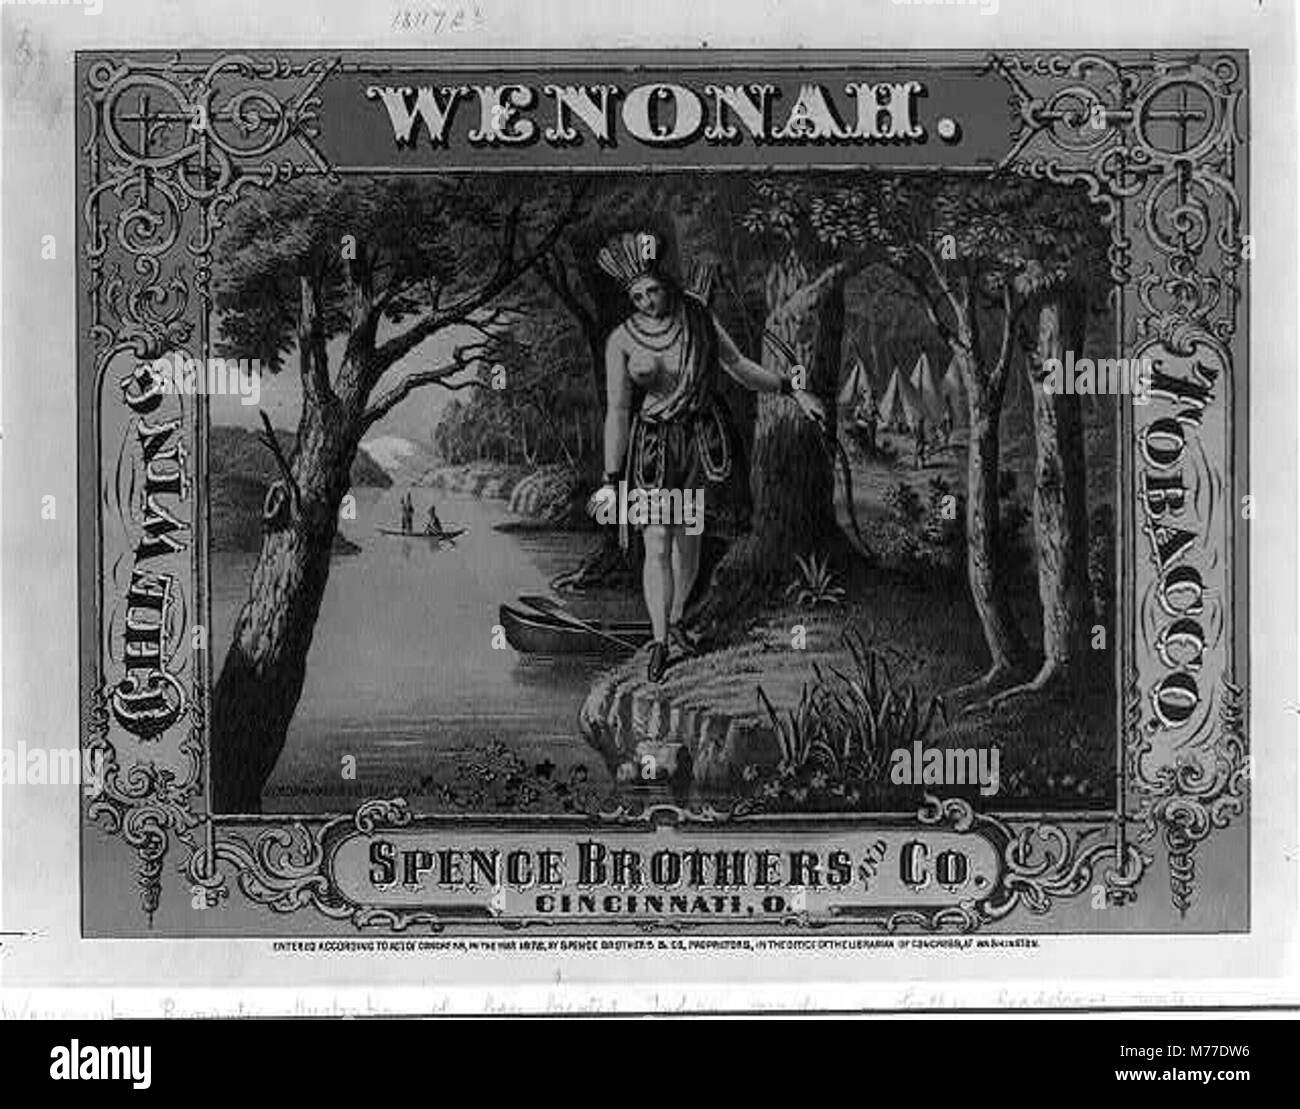 Vintage chewing tobacco Black and White Stock Photos & Images - Alamy